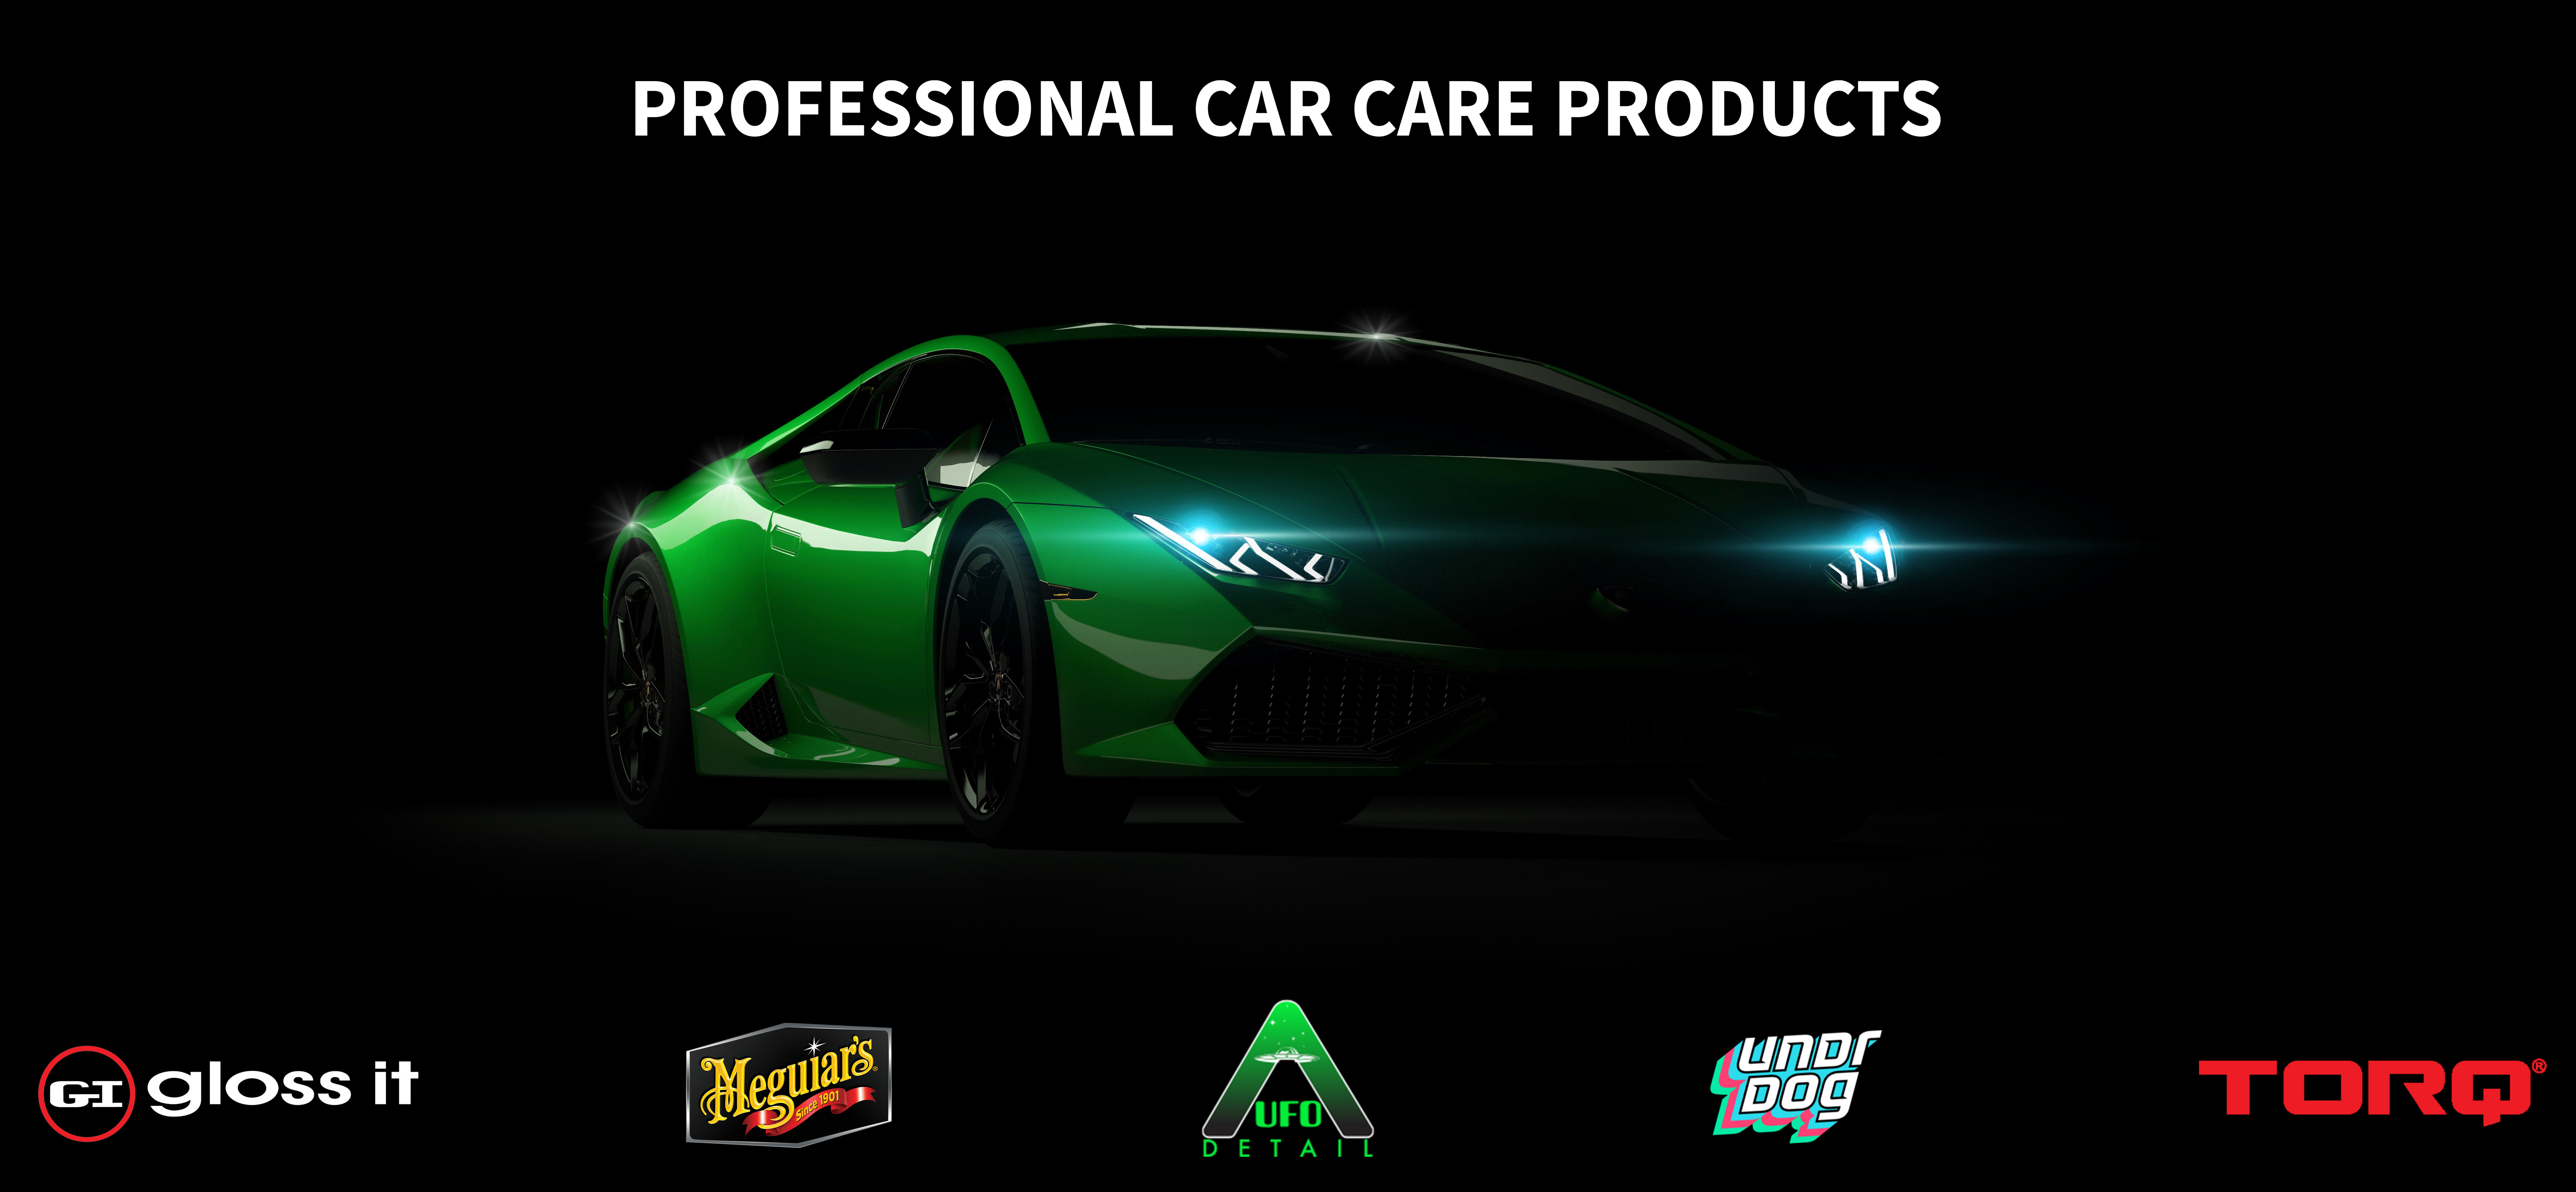 UFO Detail - Professional Detailing Products